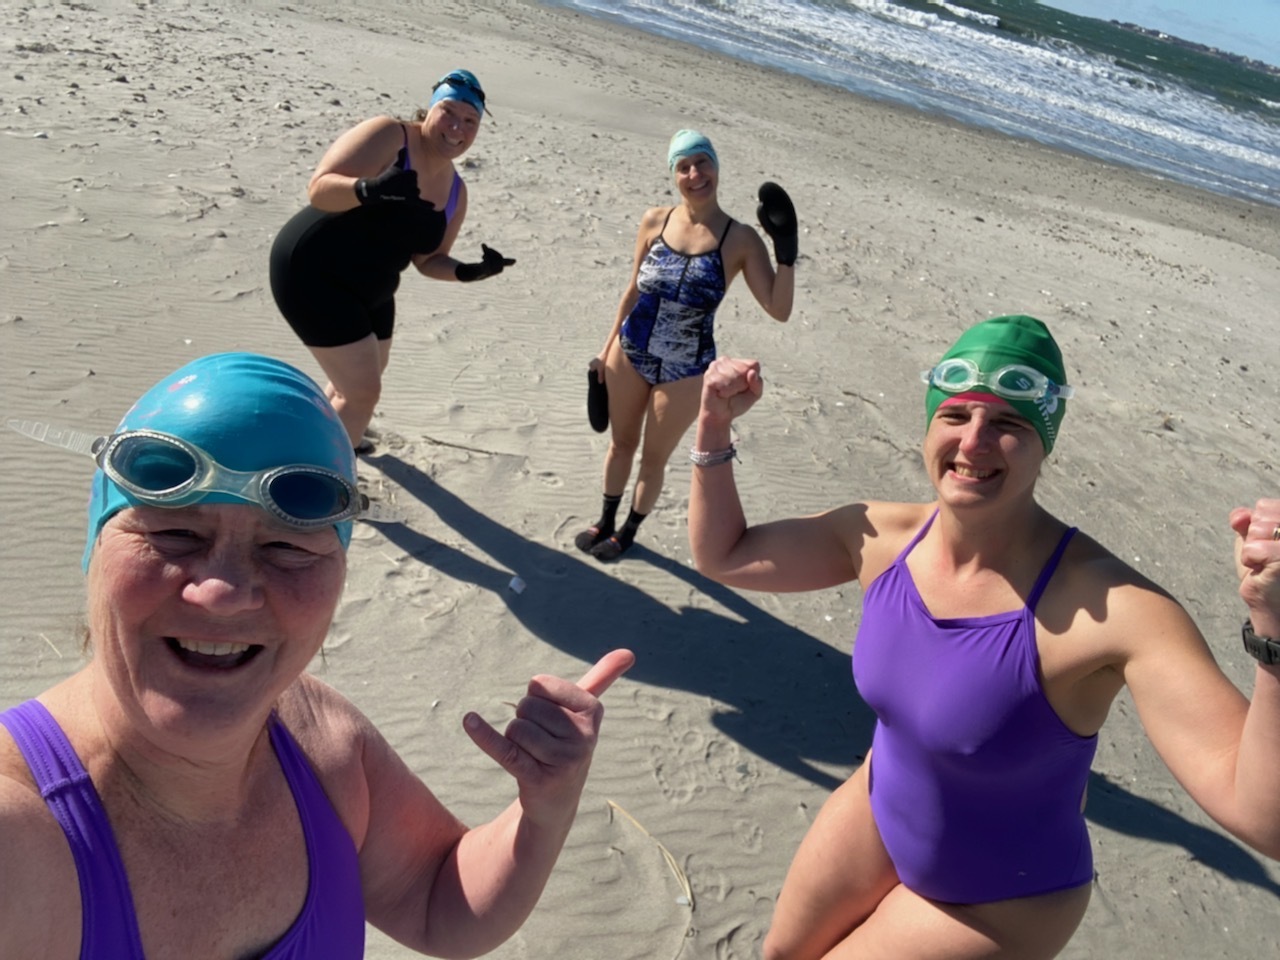 Before a swim at Sachuest Beach, Cheryl Hatch takes a selfie with Cathy Davis Hayes, from left, Natalie Coletta and Christina Lorenson, in Middletown, Rhode Island, on Feb. 19, 2022.